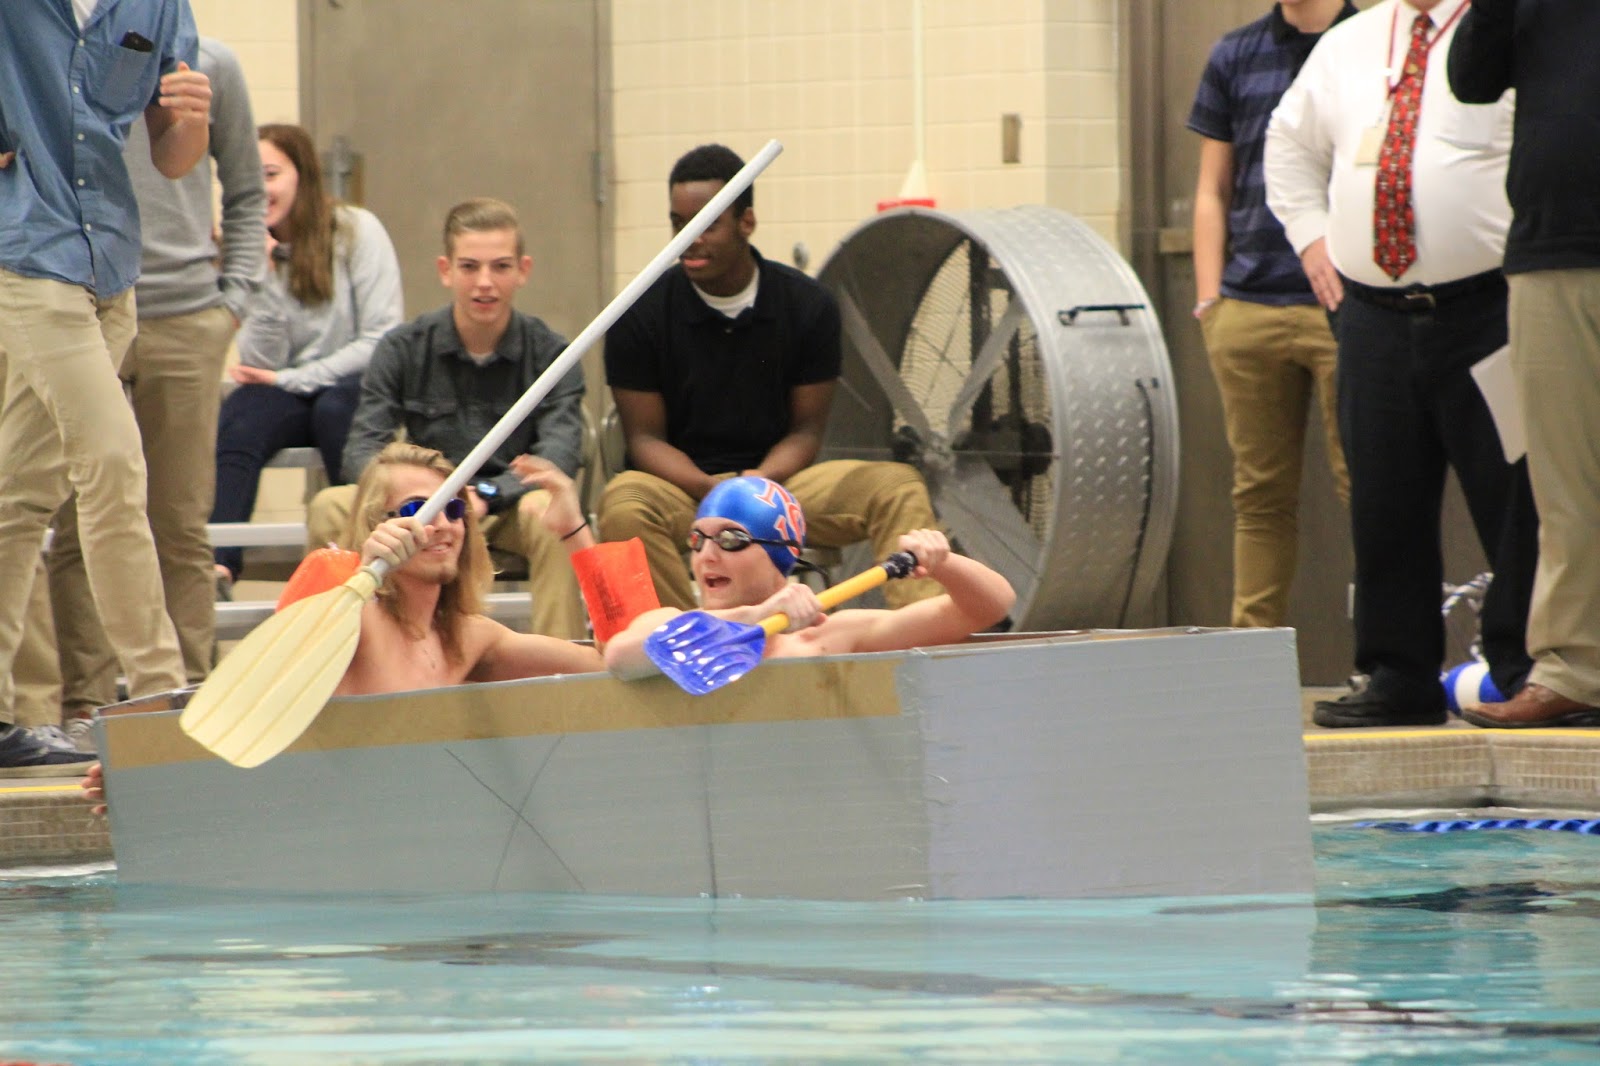 Skook News - Your #1 Source for Schuylkill County News: North Schuylkill  STEM Project Has Students Design Cardboard Boats